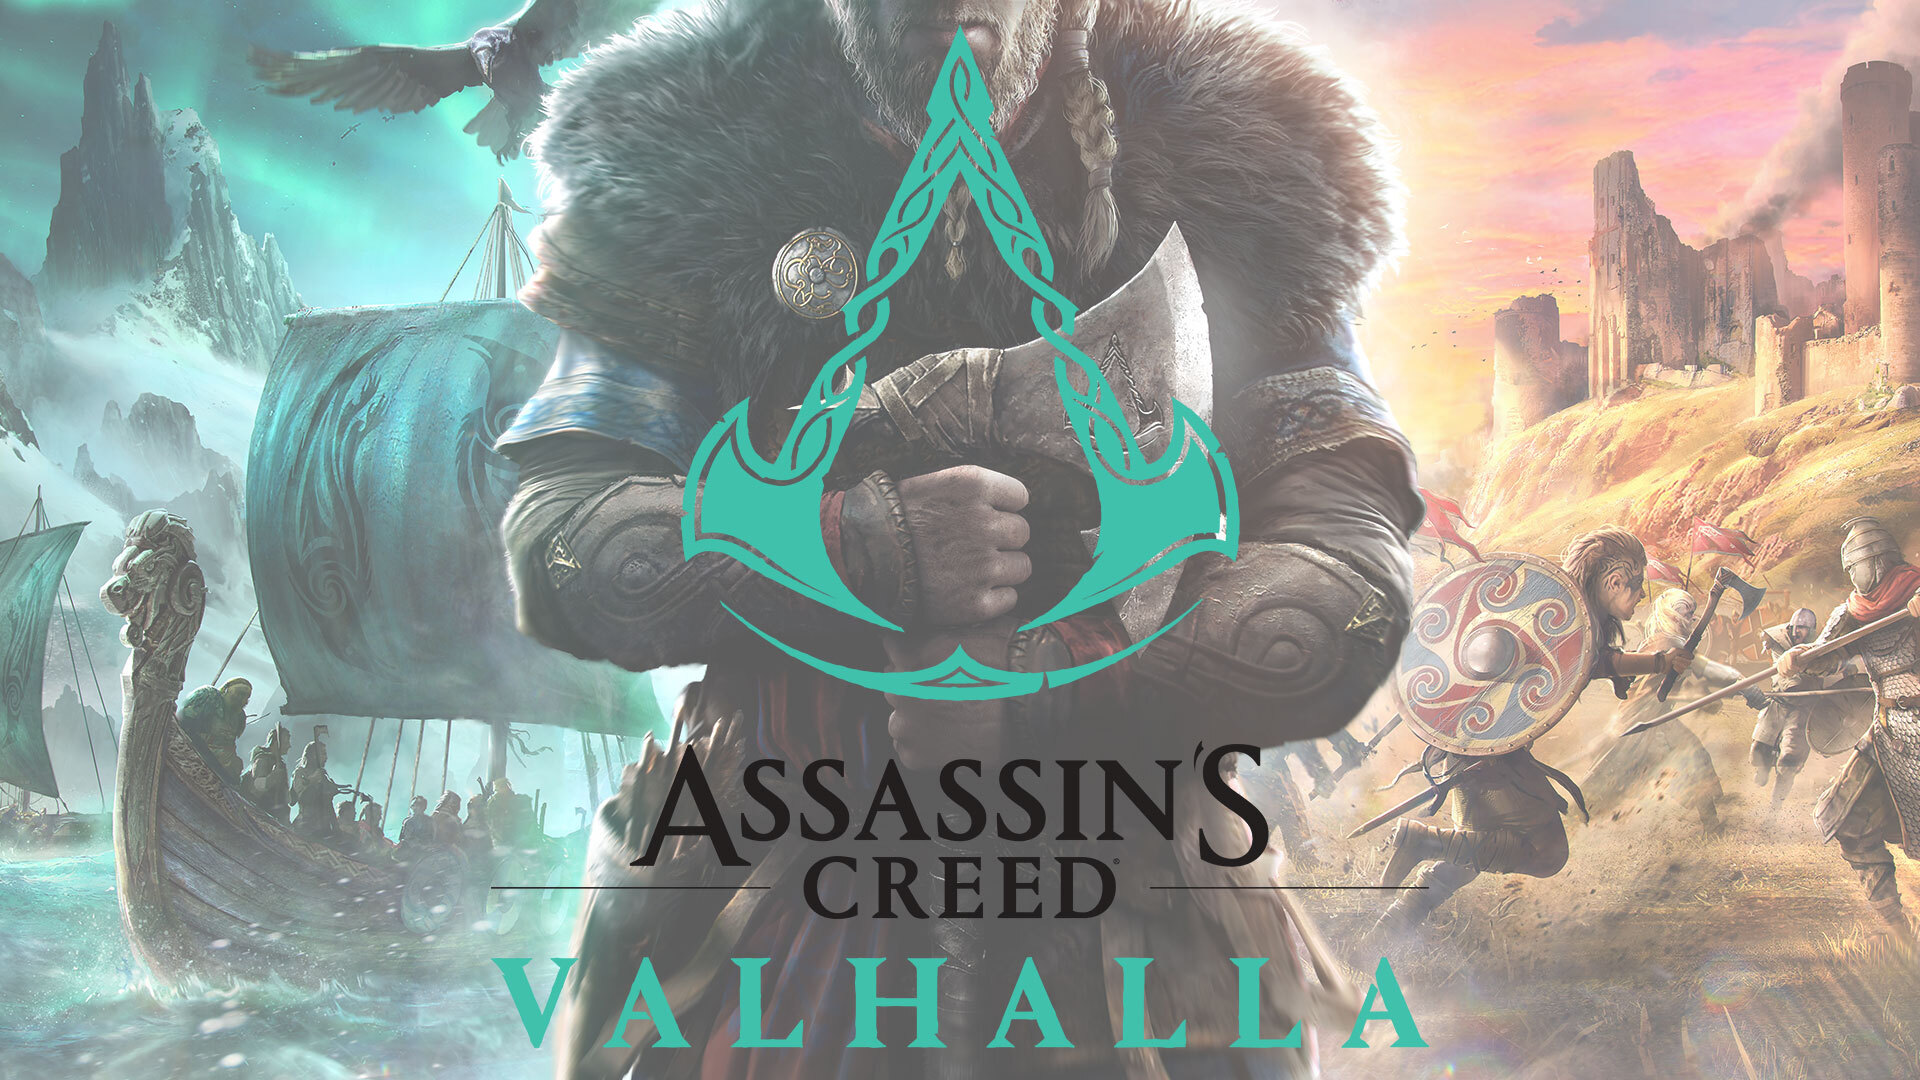 Assassin's Creed Valhalla: Launch Trailer